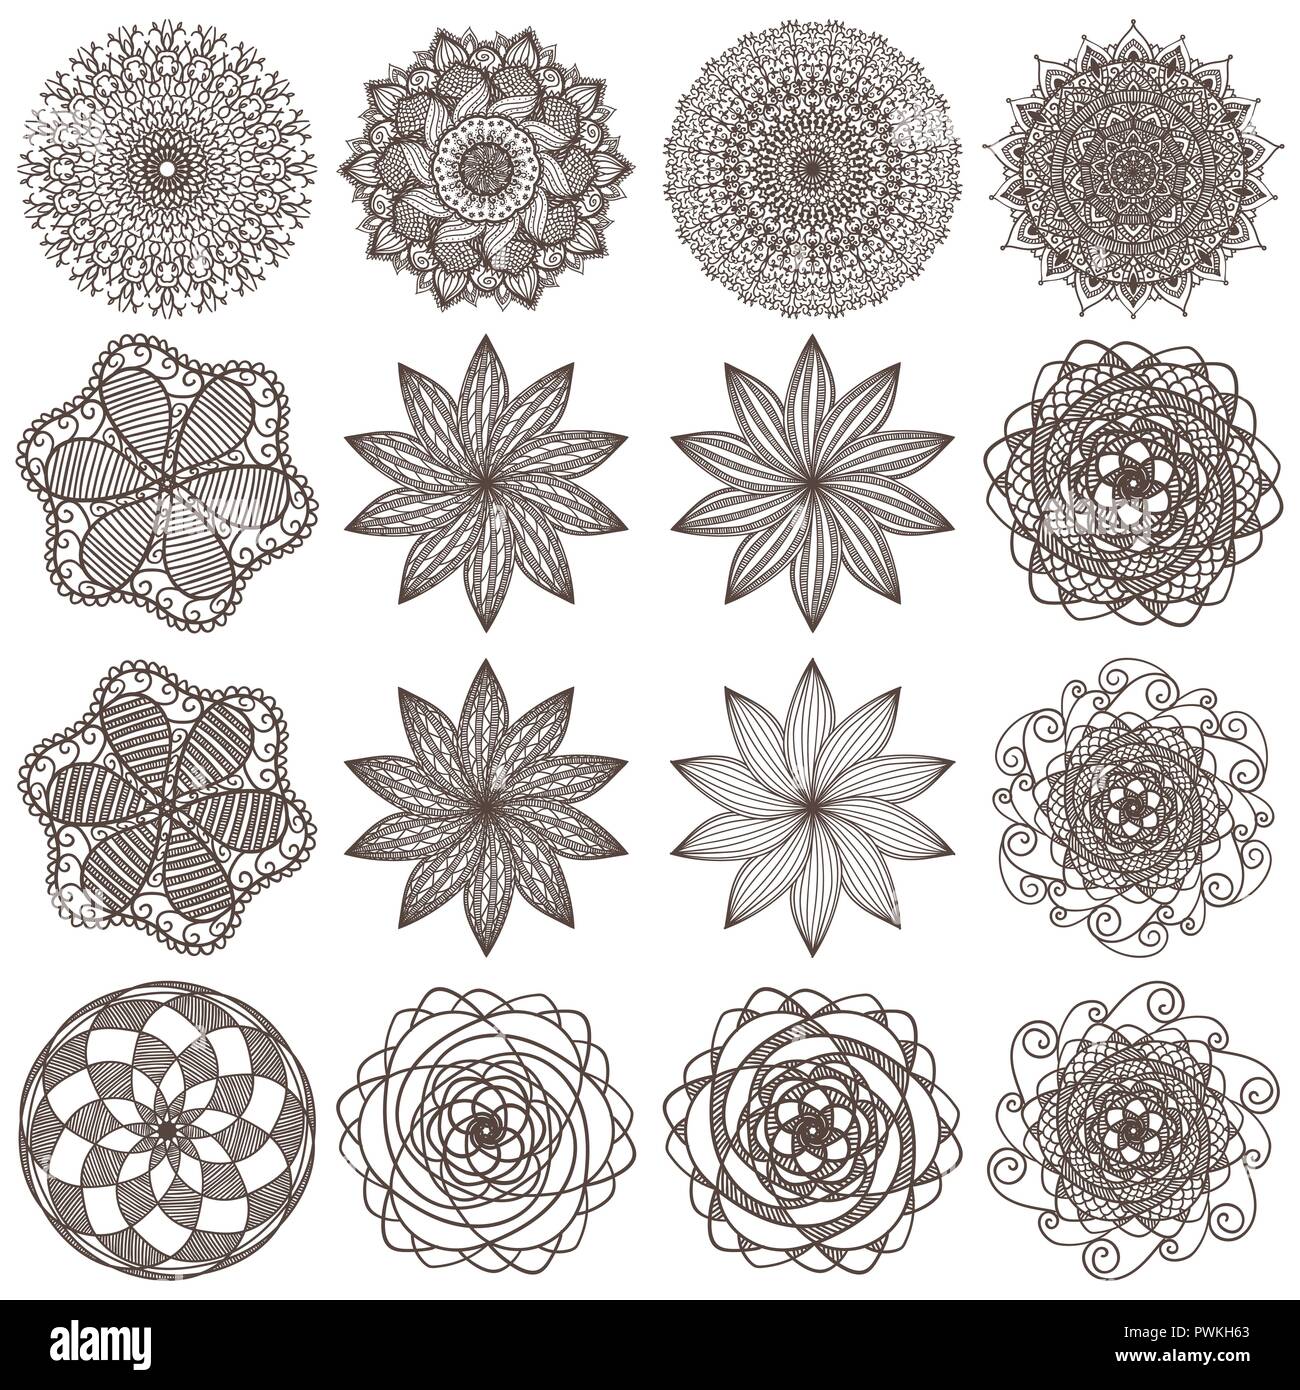 Set of creative and artistic mandalas isolated on white background. Collection of mehendi tattoo designs. Beautiful creative abstract floral ornaments Stock Vector